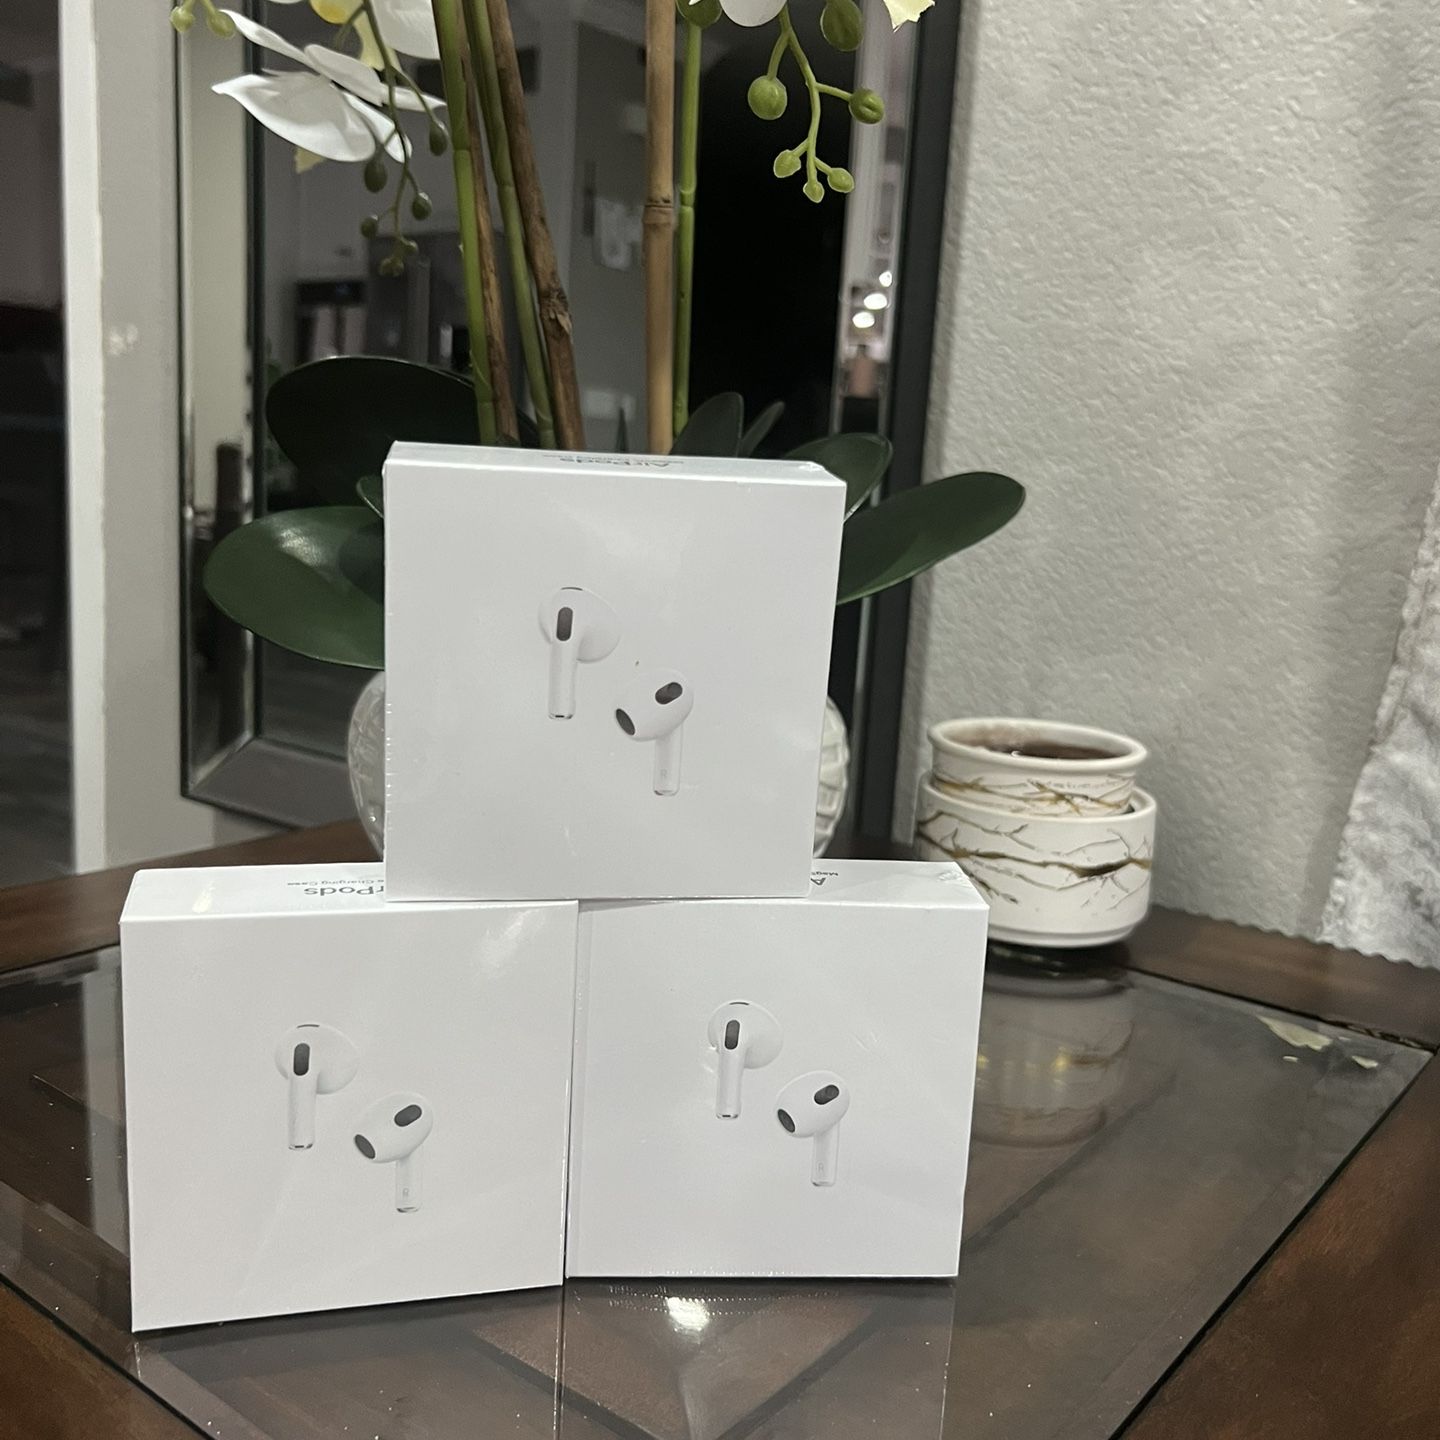 airpods Gen 3 New and sealed 